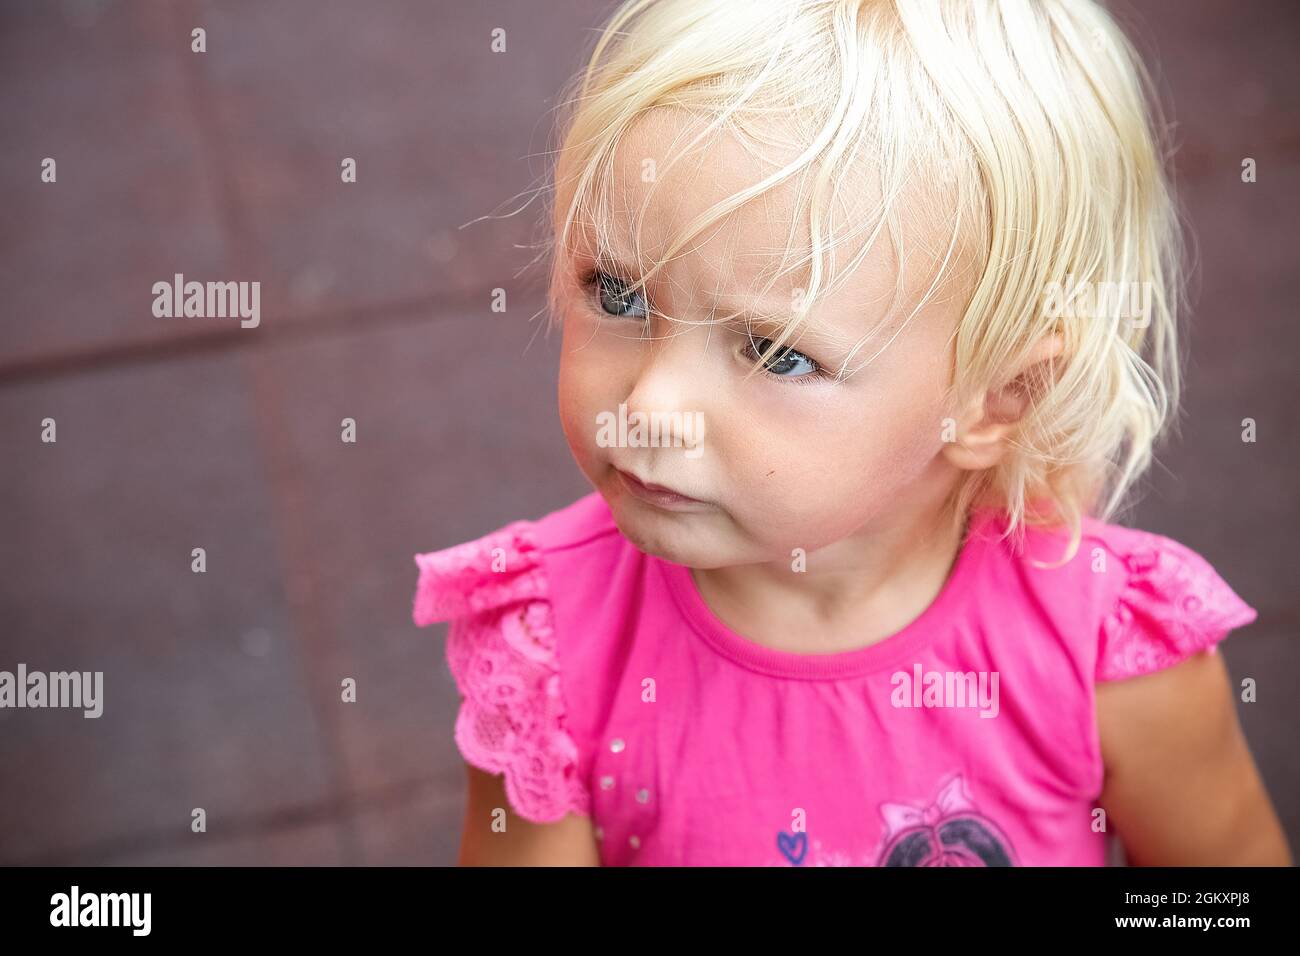 Serious angry baby girl looking left. Blond blu eye kid in pink t-shirt portrait. Blurred protective rubber pavement of playground in background Stock Photo